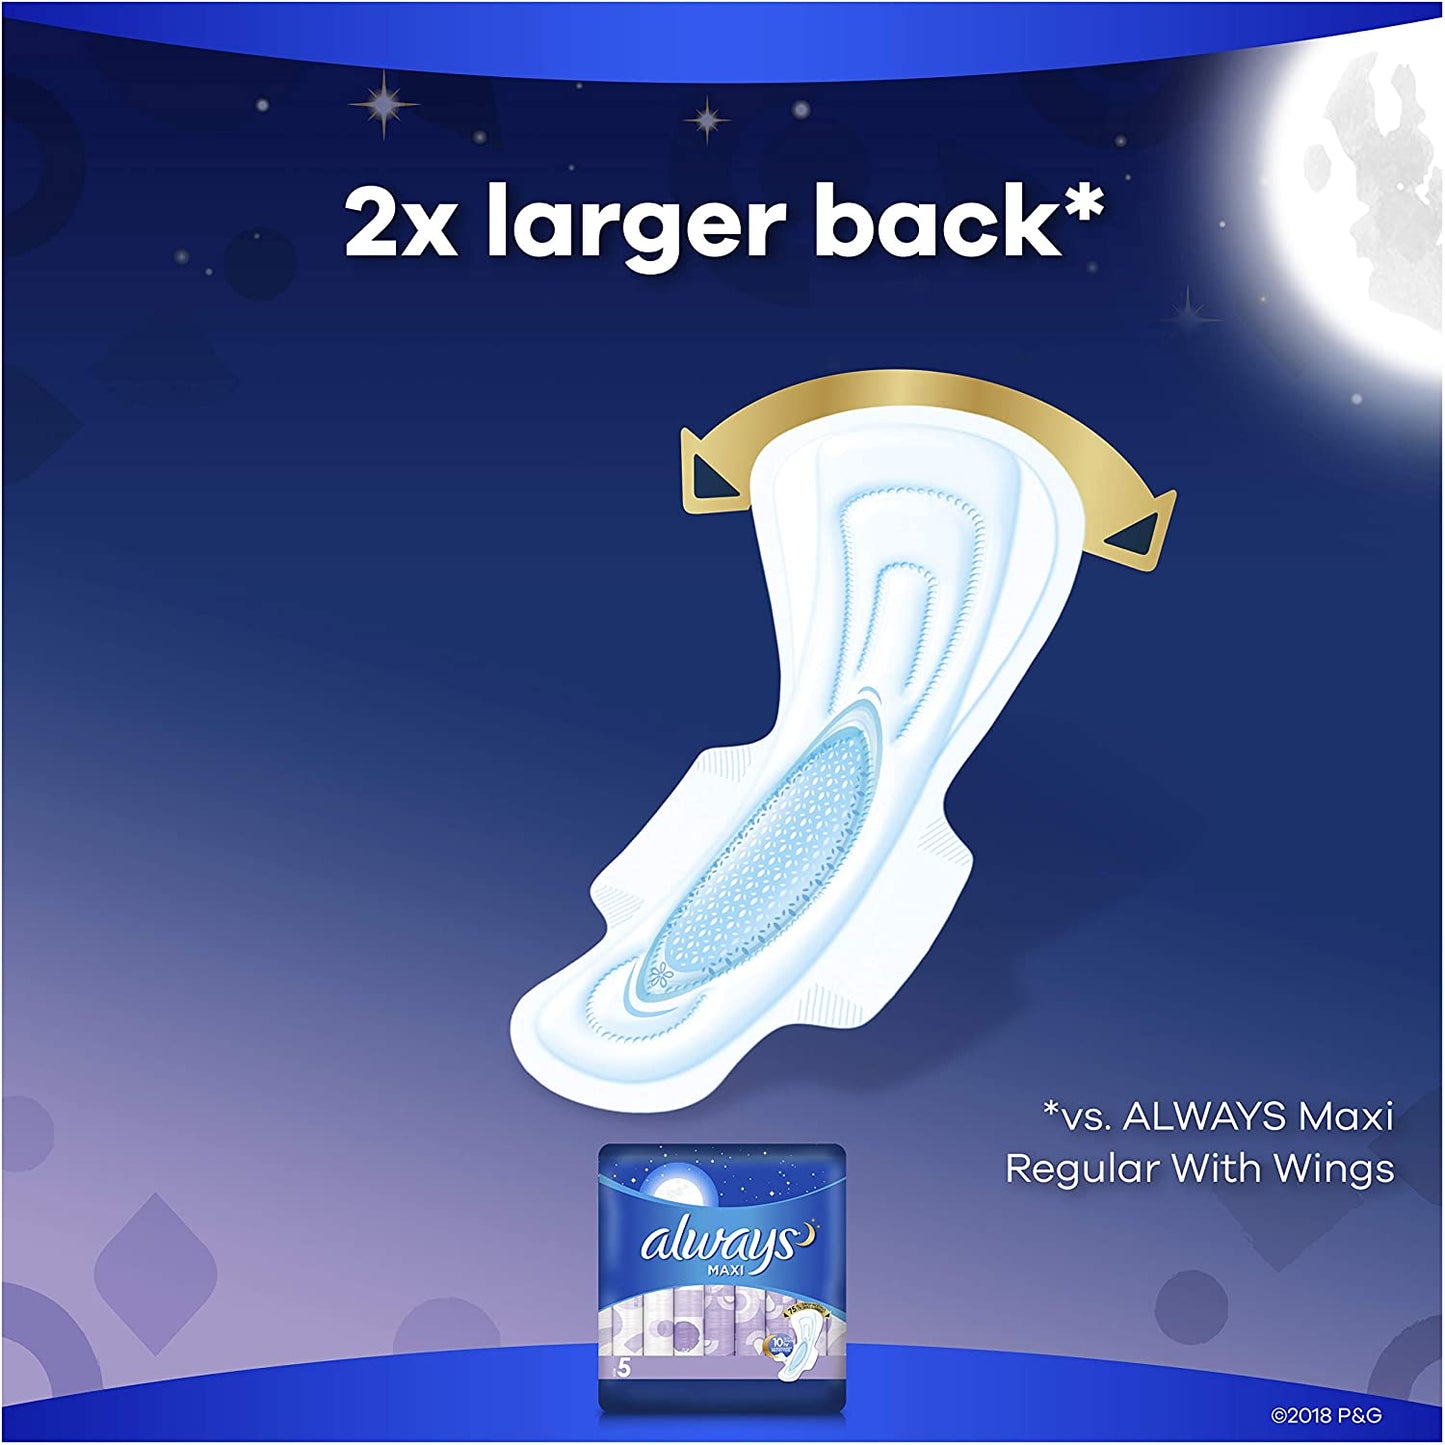 Maxi Size 5 Extra Heavy Overnight Pads with Wings Unscented, 20 Count